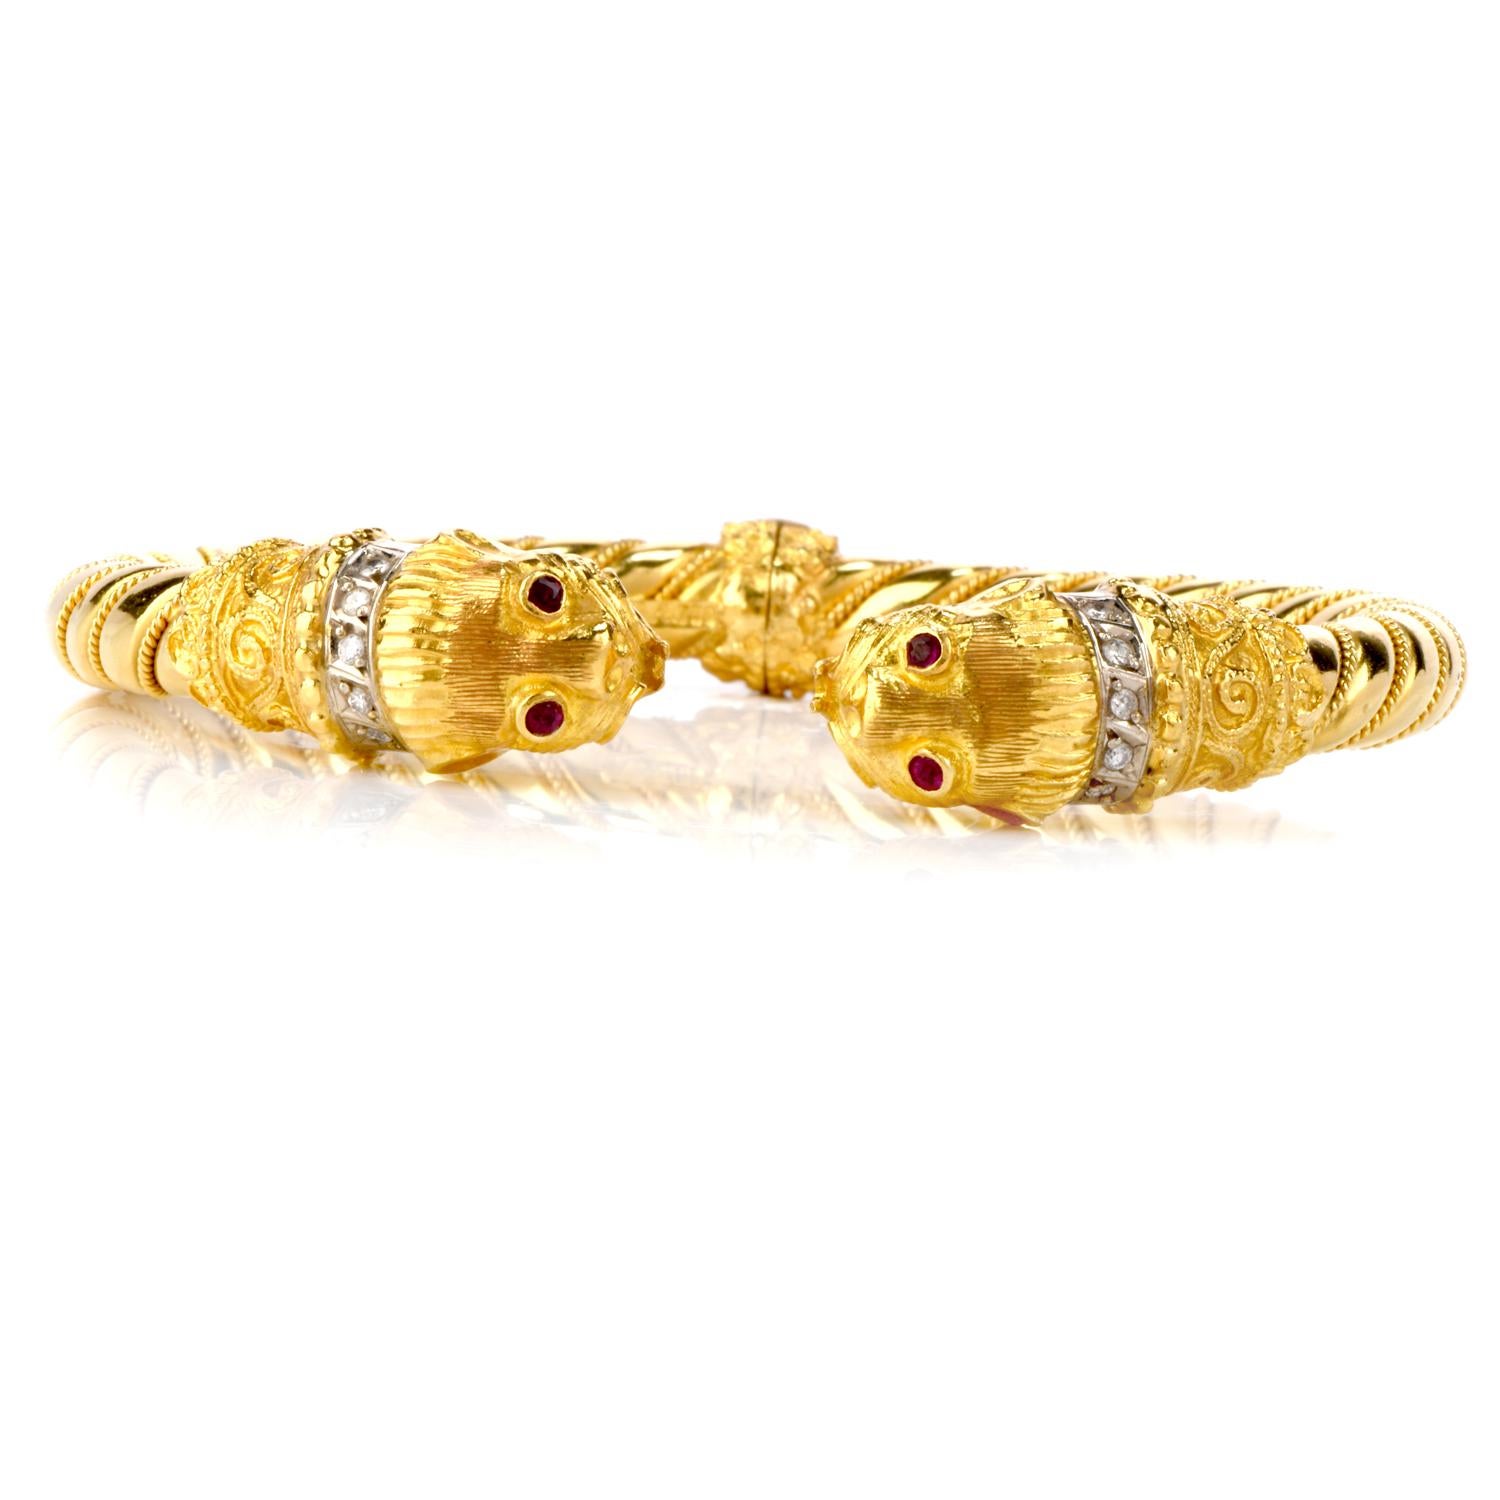 Perfect for the Leo in your life, or for anyone that admires the ferocity of lion artistry, is the Vintage Diamond Ruby 18K Gold Lion’s Head Cuff Bangle Bracelet!  This bracelet is crafted in 18-karat yellow gold and has two fierce lion’s heads. 